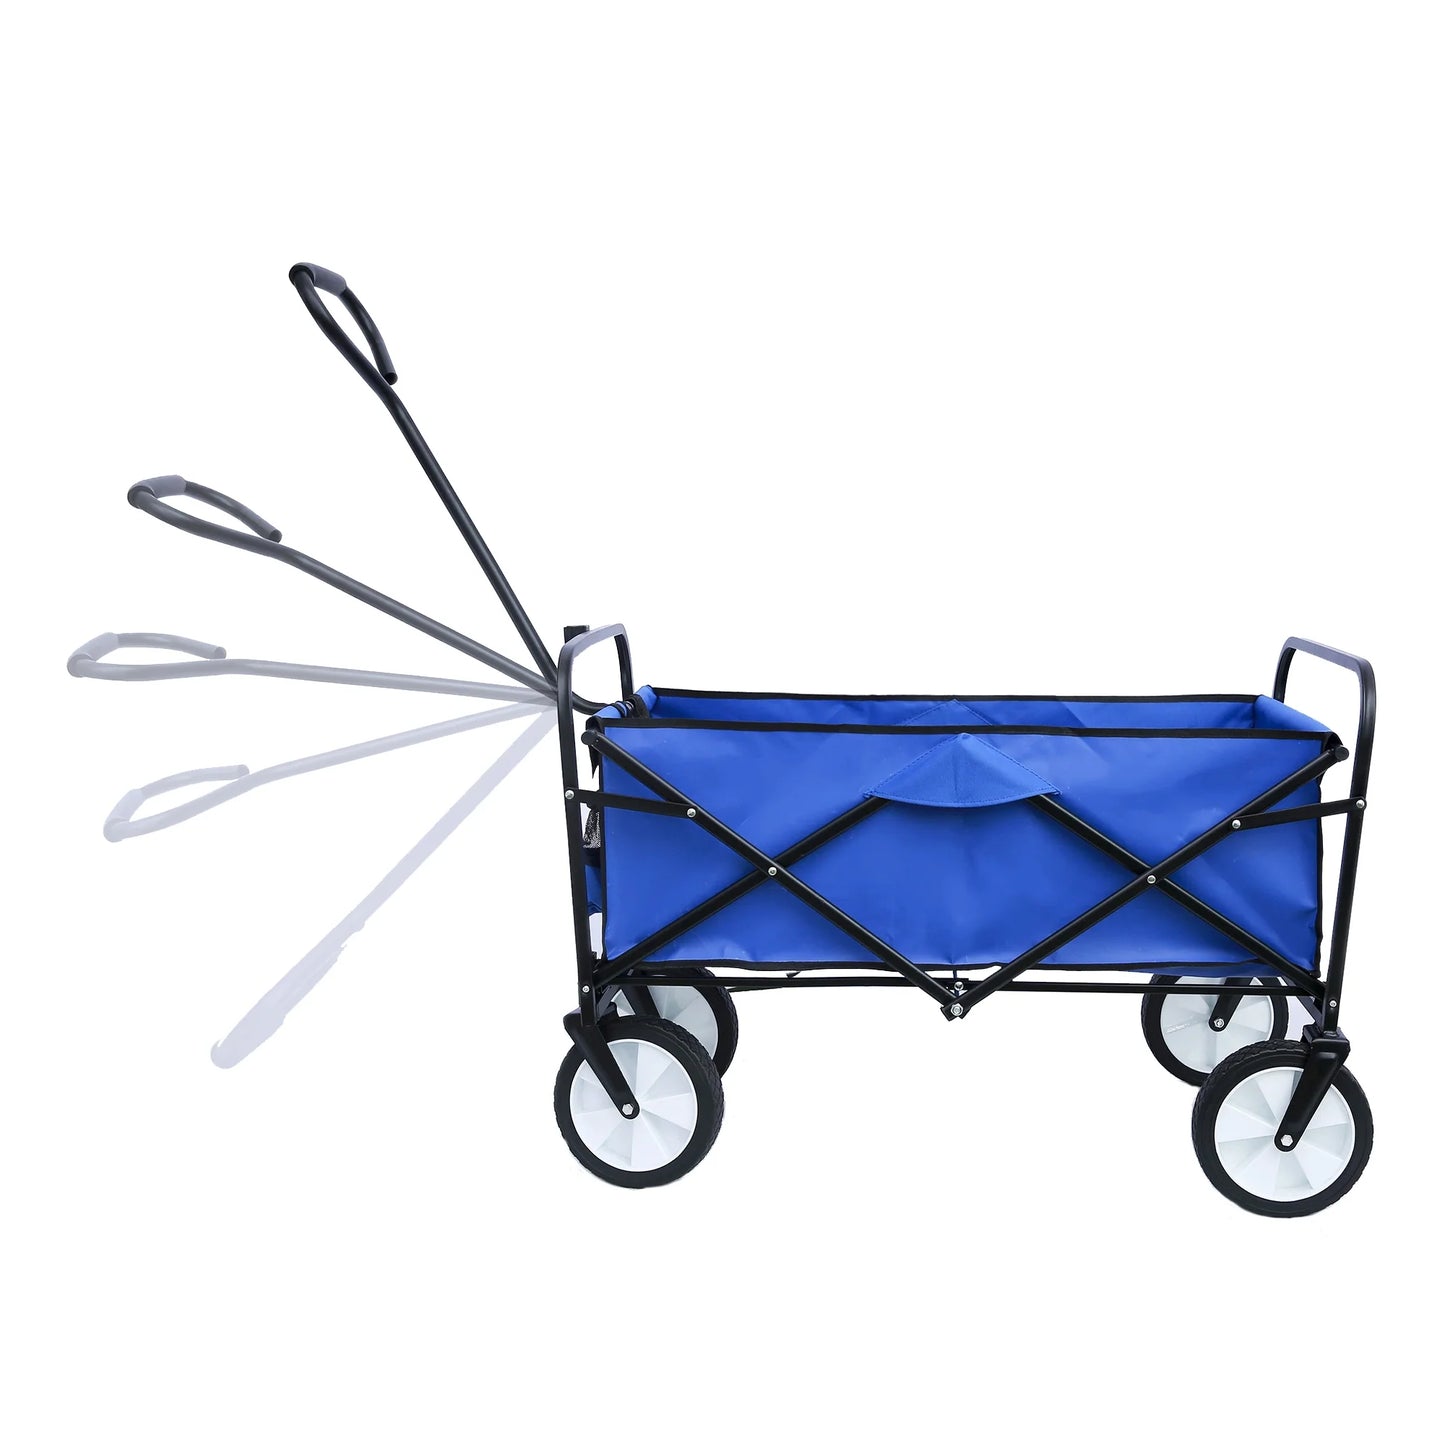 Folding Wagon Garden Cart - Large Capacity Utility Grocery Shopping Beach Carts with Wheels Moving Trolley for Outdoor